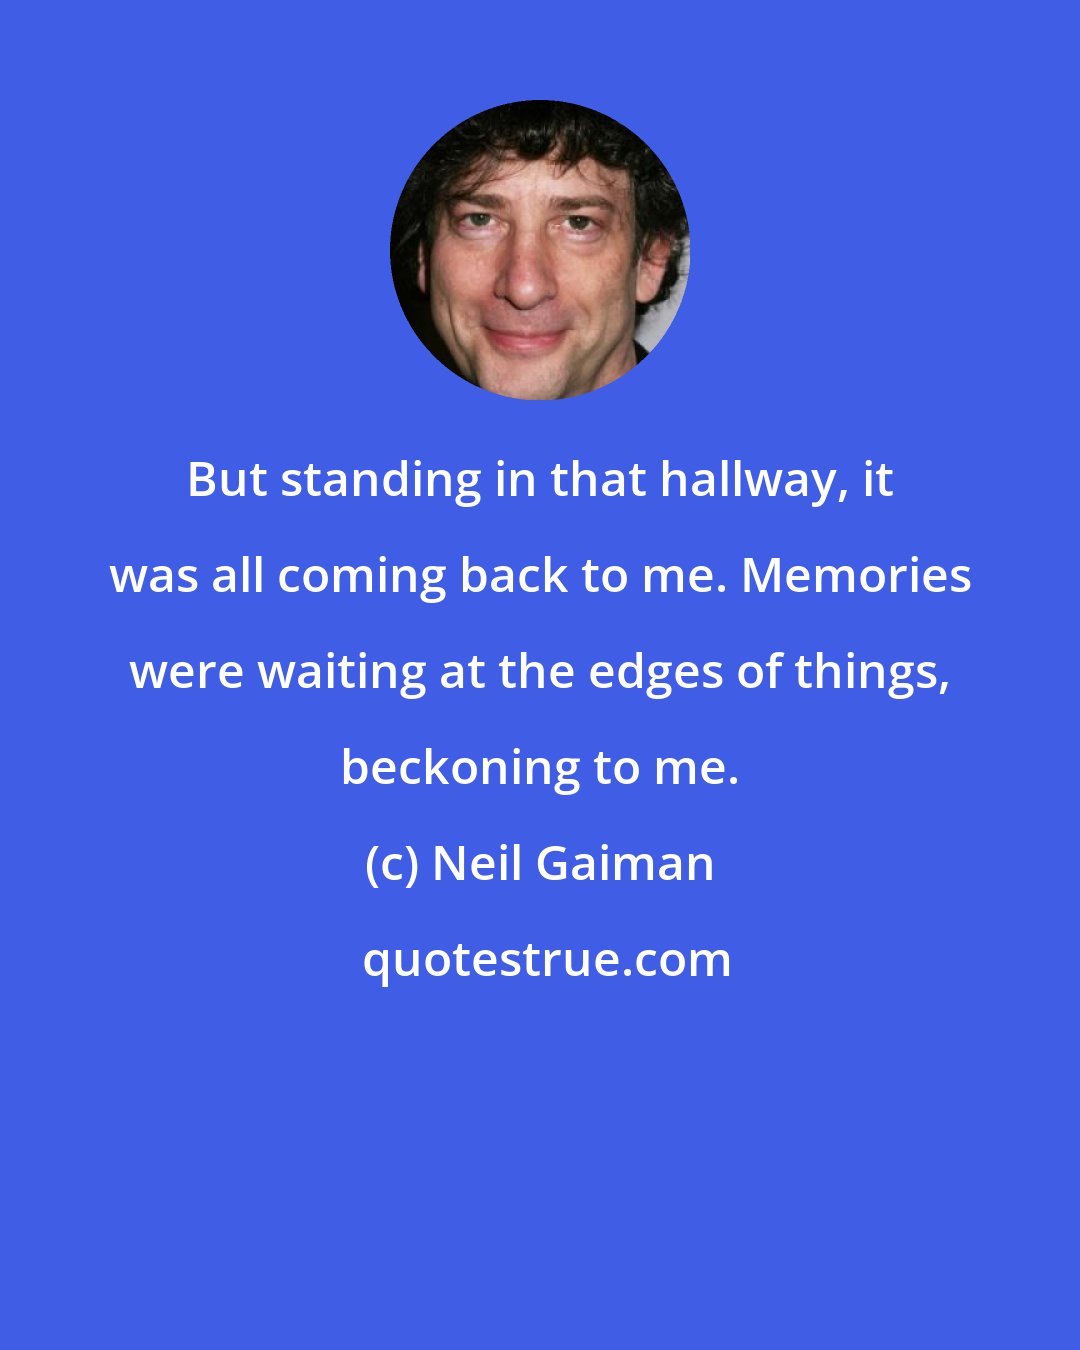 Neil Gaiman: But standing in that hallway, it was all coming back to me. Memories were waiting at the edges of things, beckoning to me.